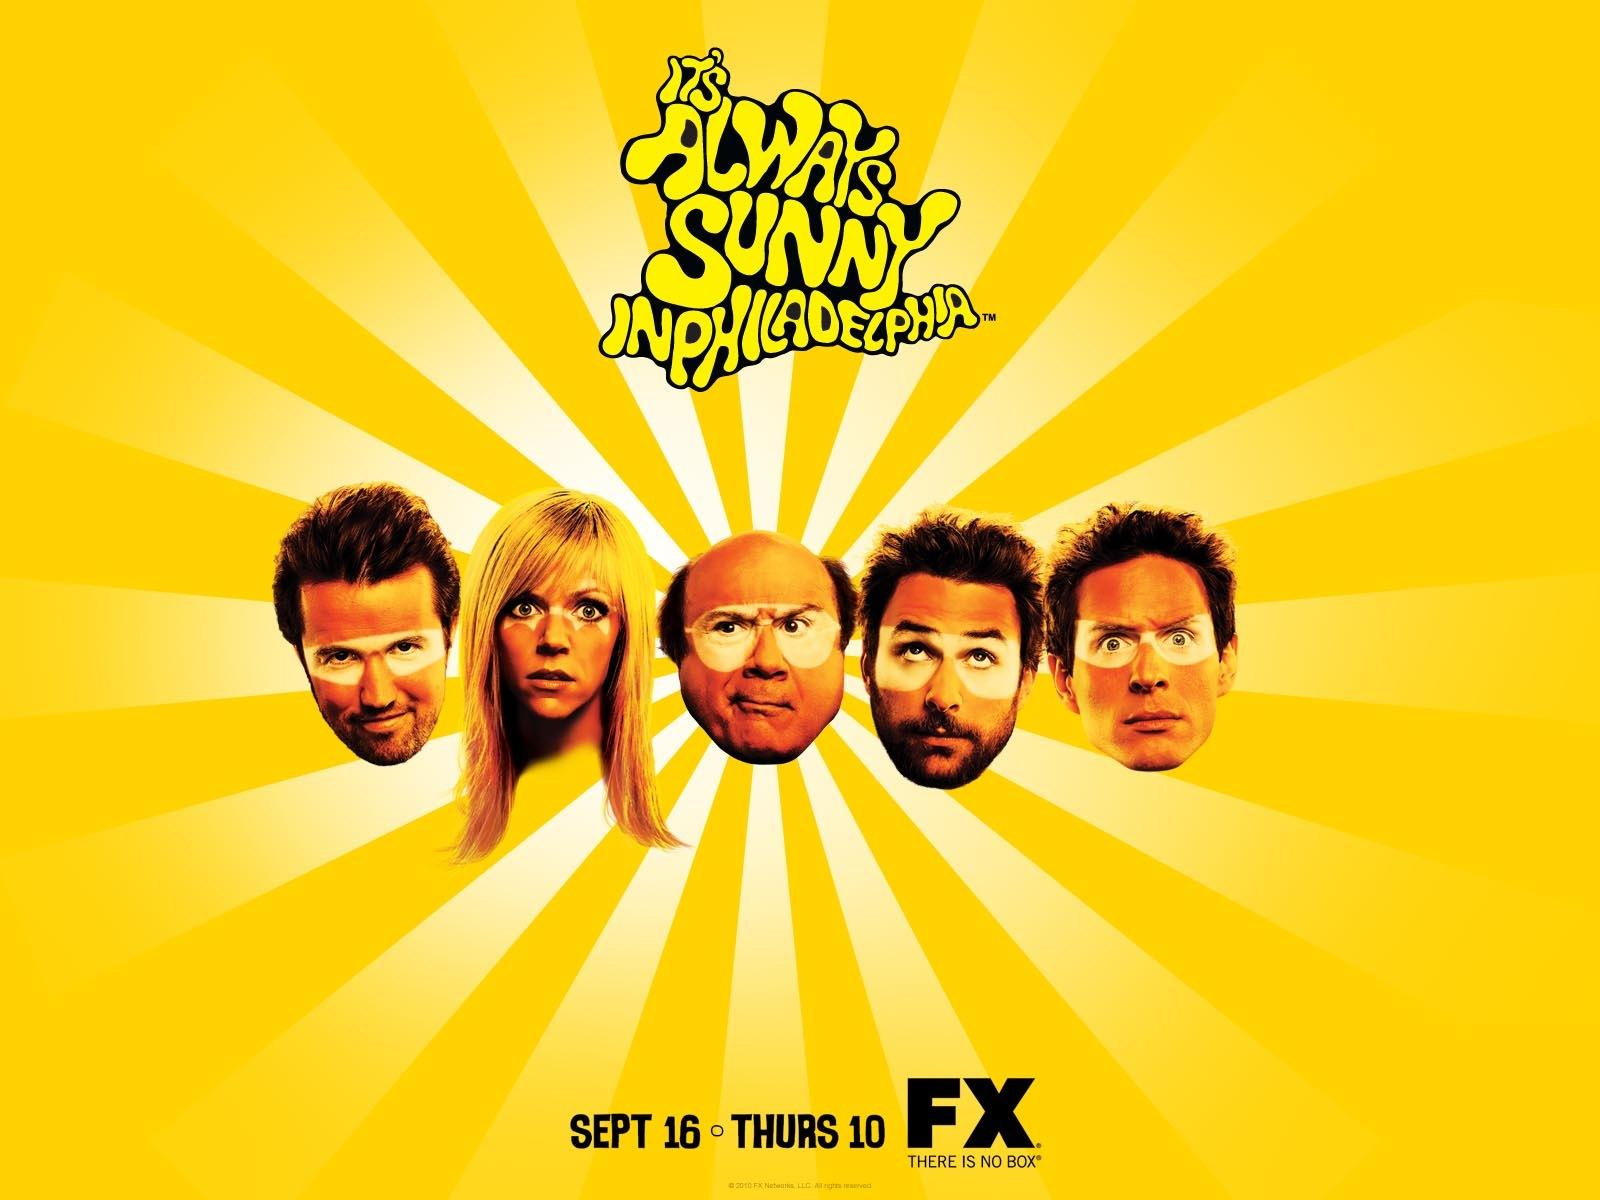 It S Always Sunny In Philadelphia Wallpapers Wallpaper Cave Images, Photos, Reviews